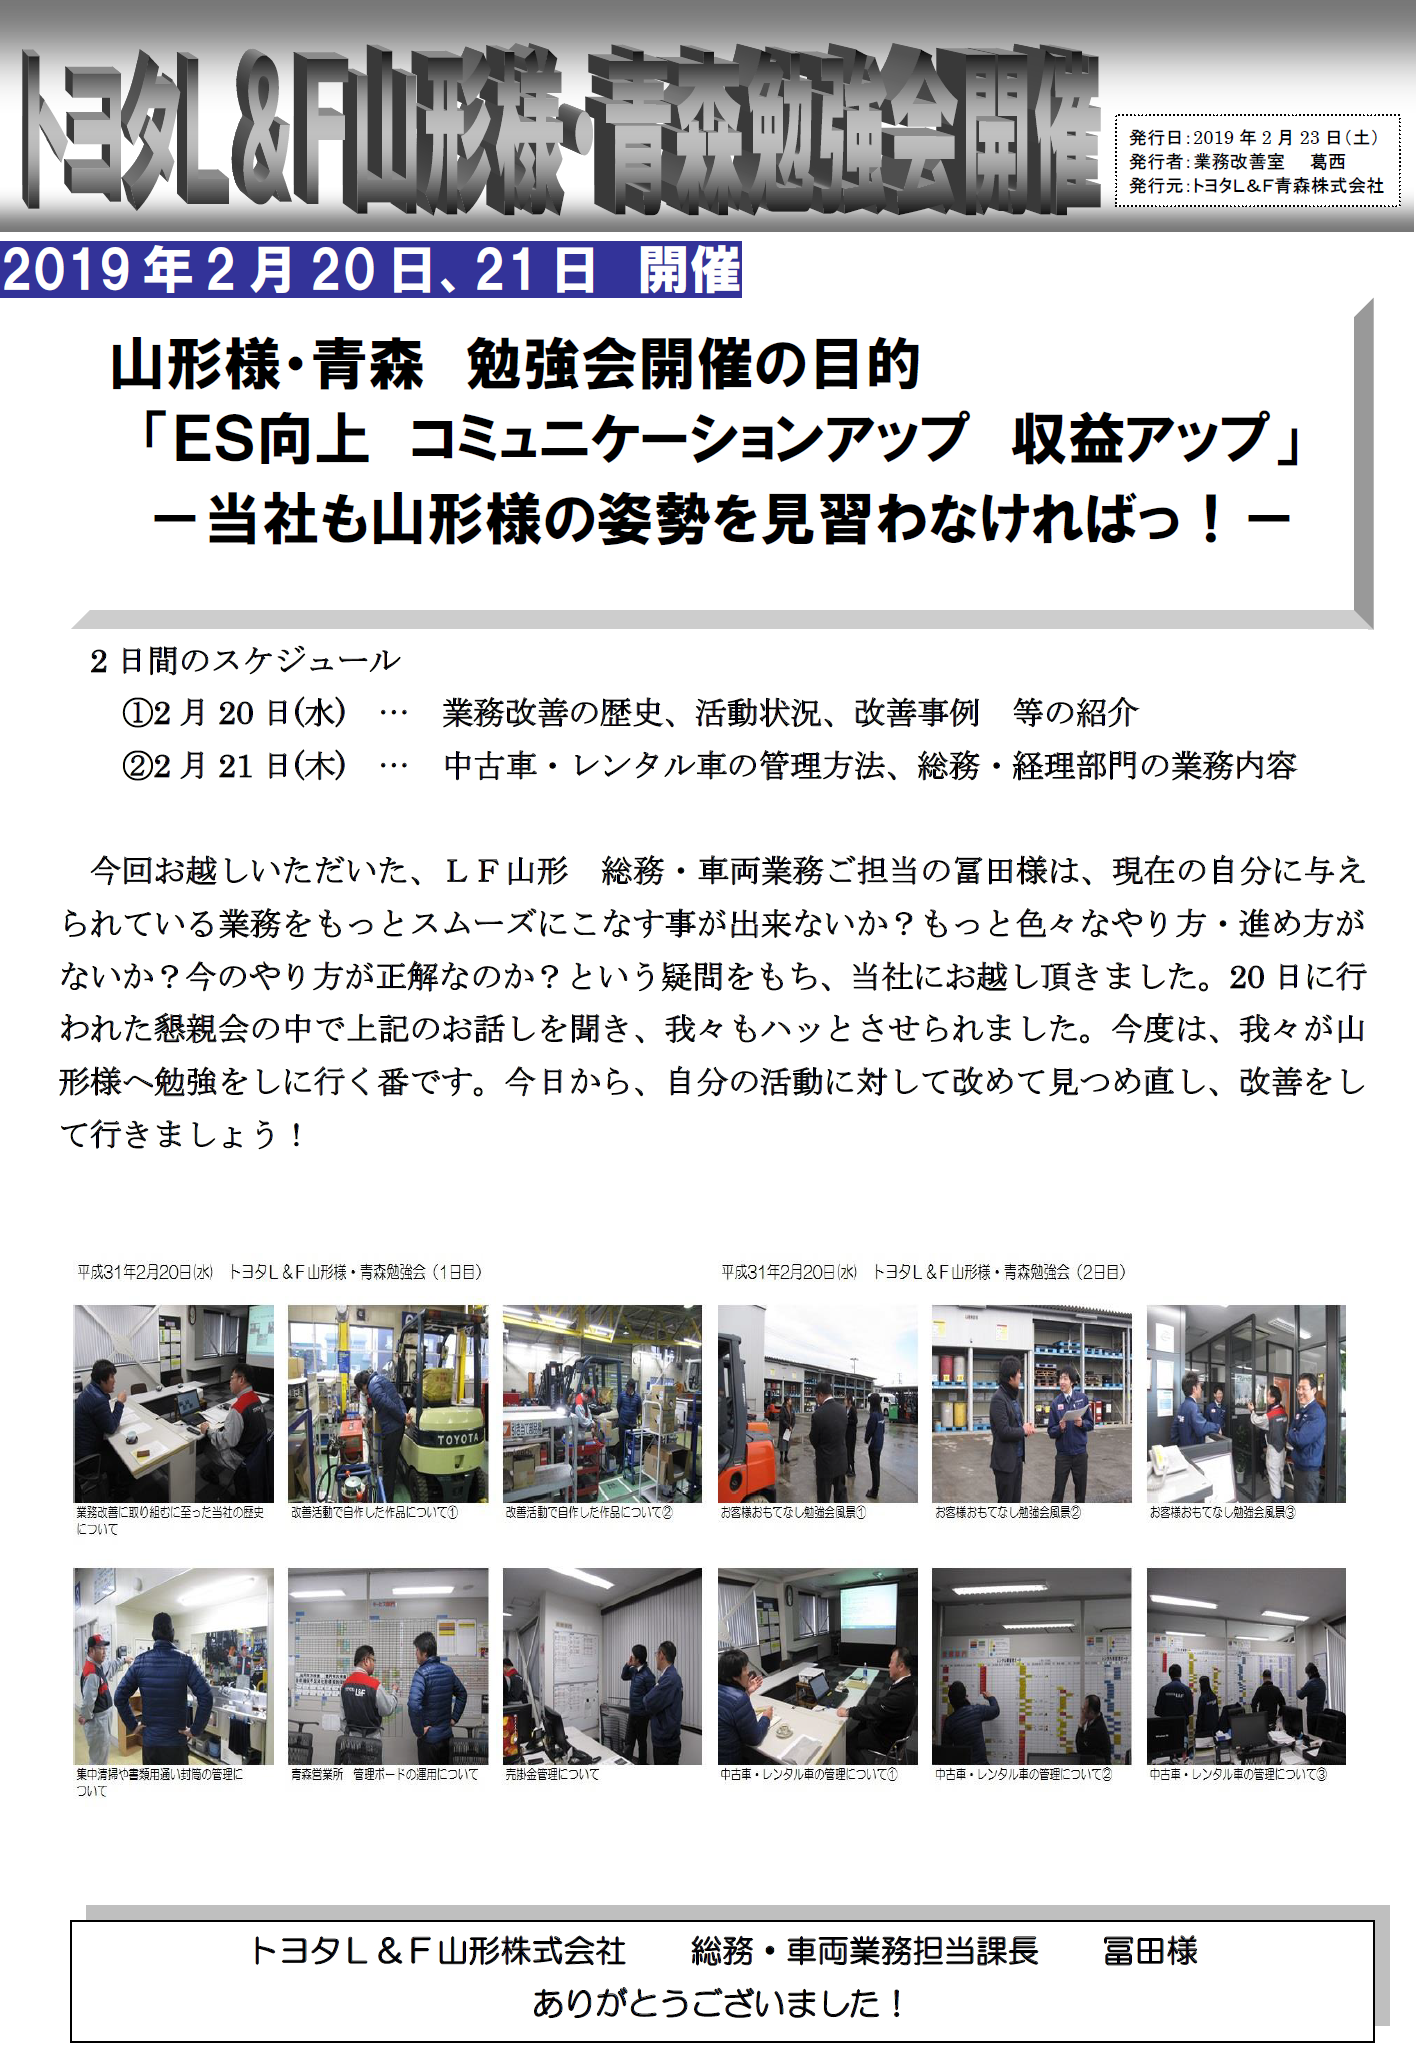 http://www.toyota-lf-aomori.co.jp/news/images/2.20.png